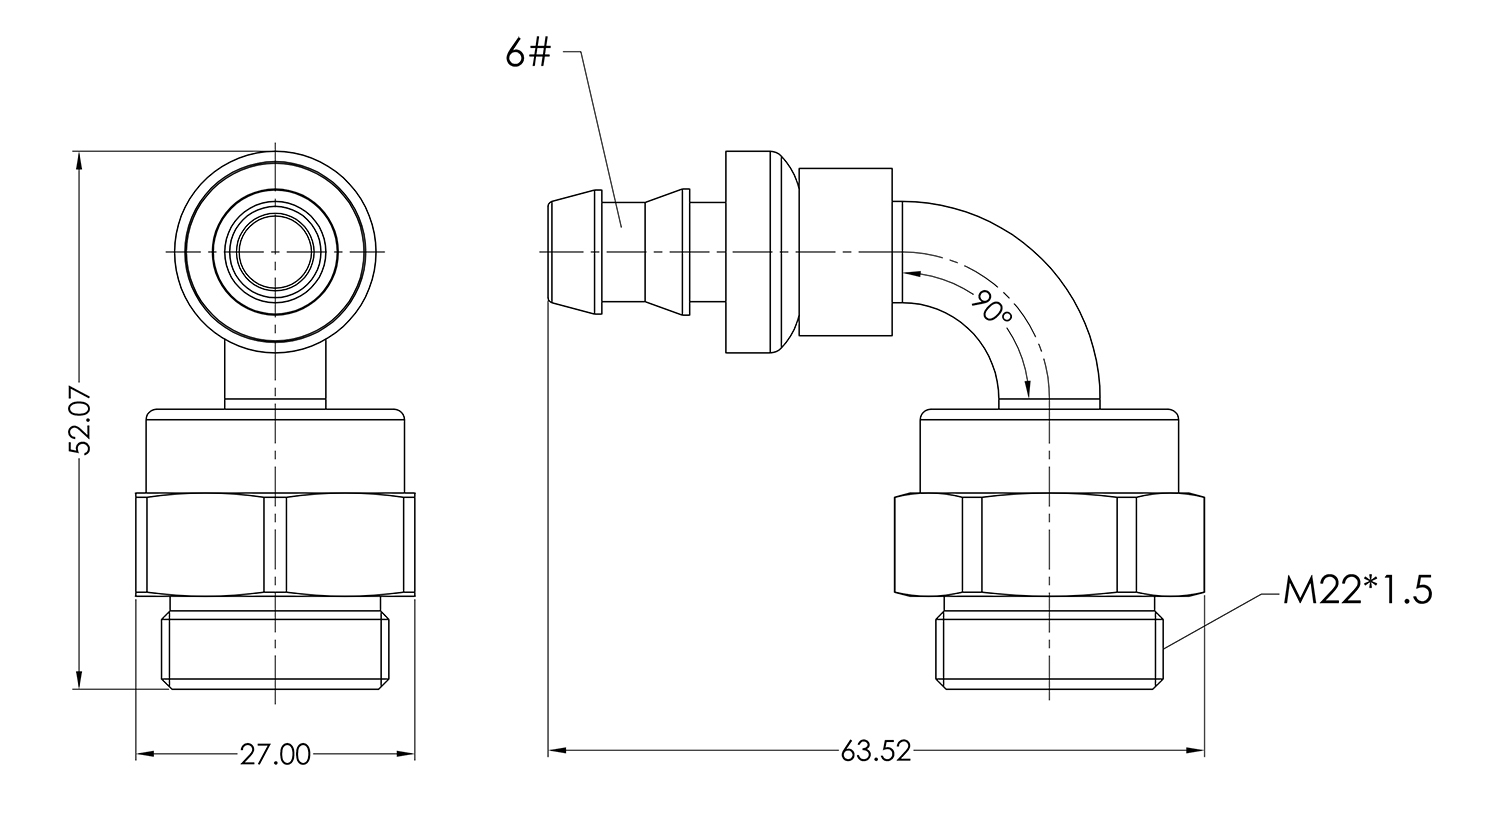 M22 to AN06 90 Push Lock Hose End Dimensions